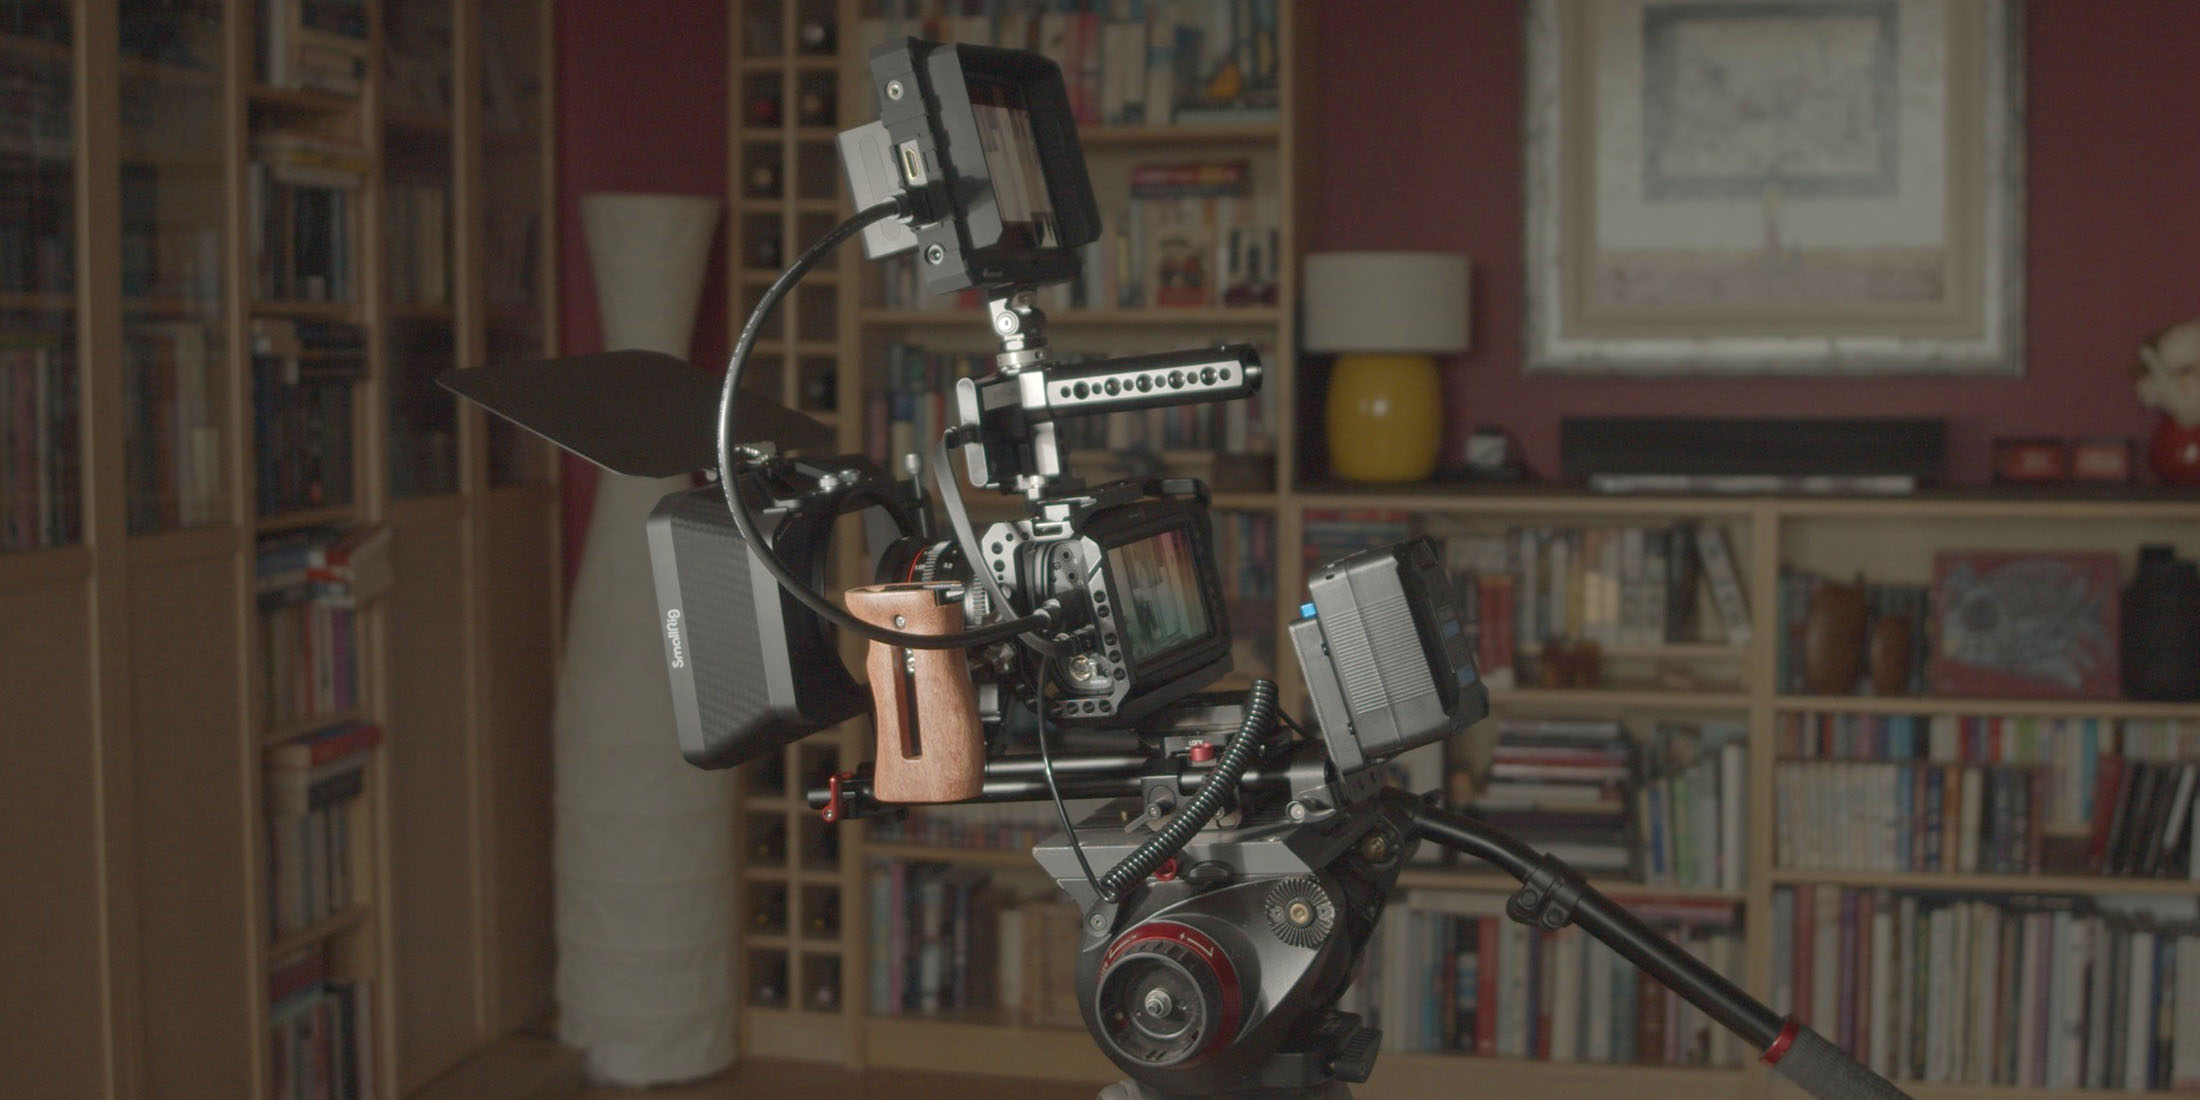 BMPCC 4K rig: Video and complete breakdown of components - 9to5Toys